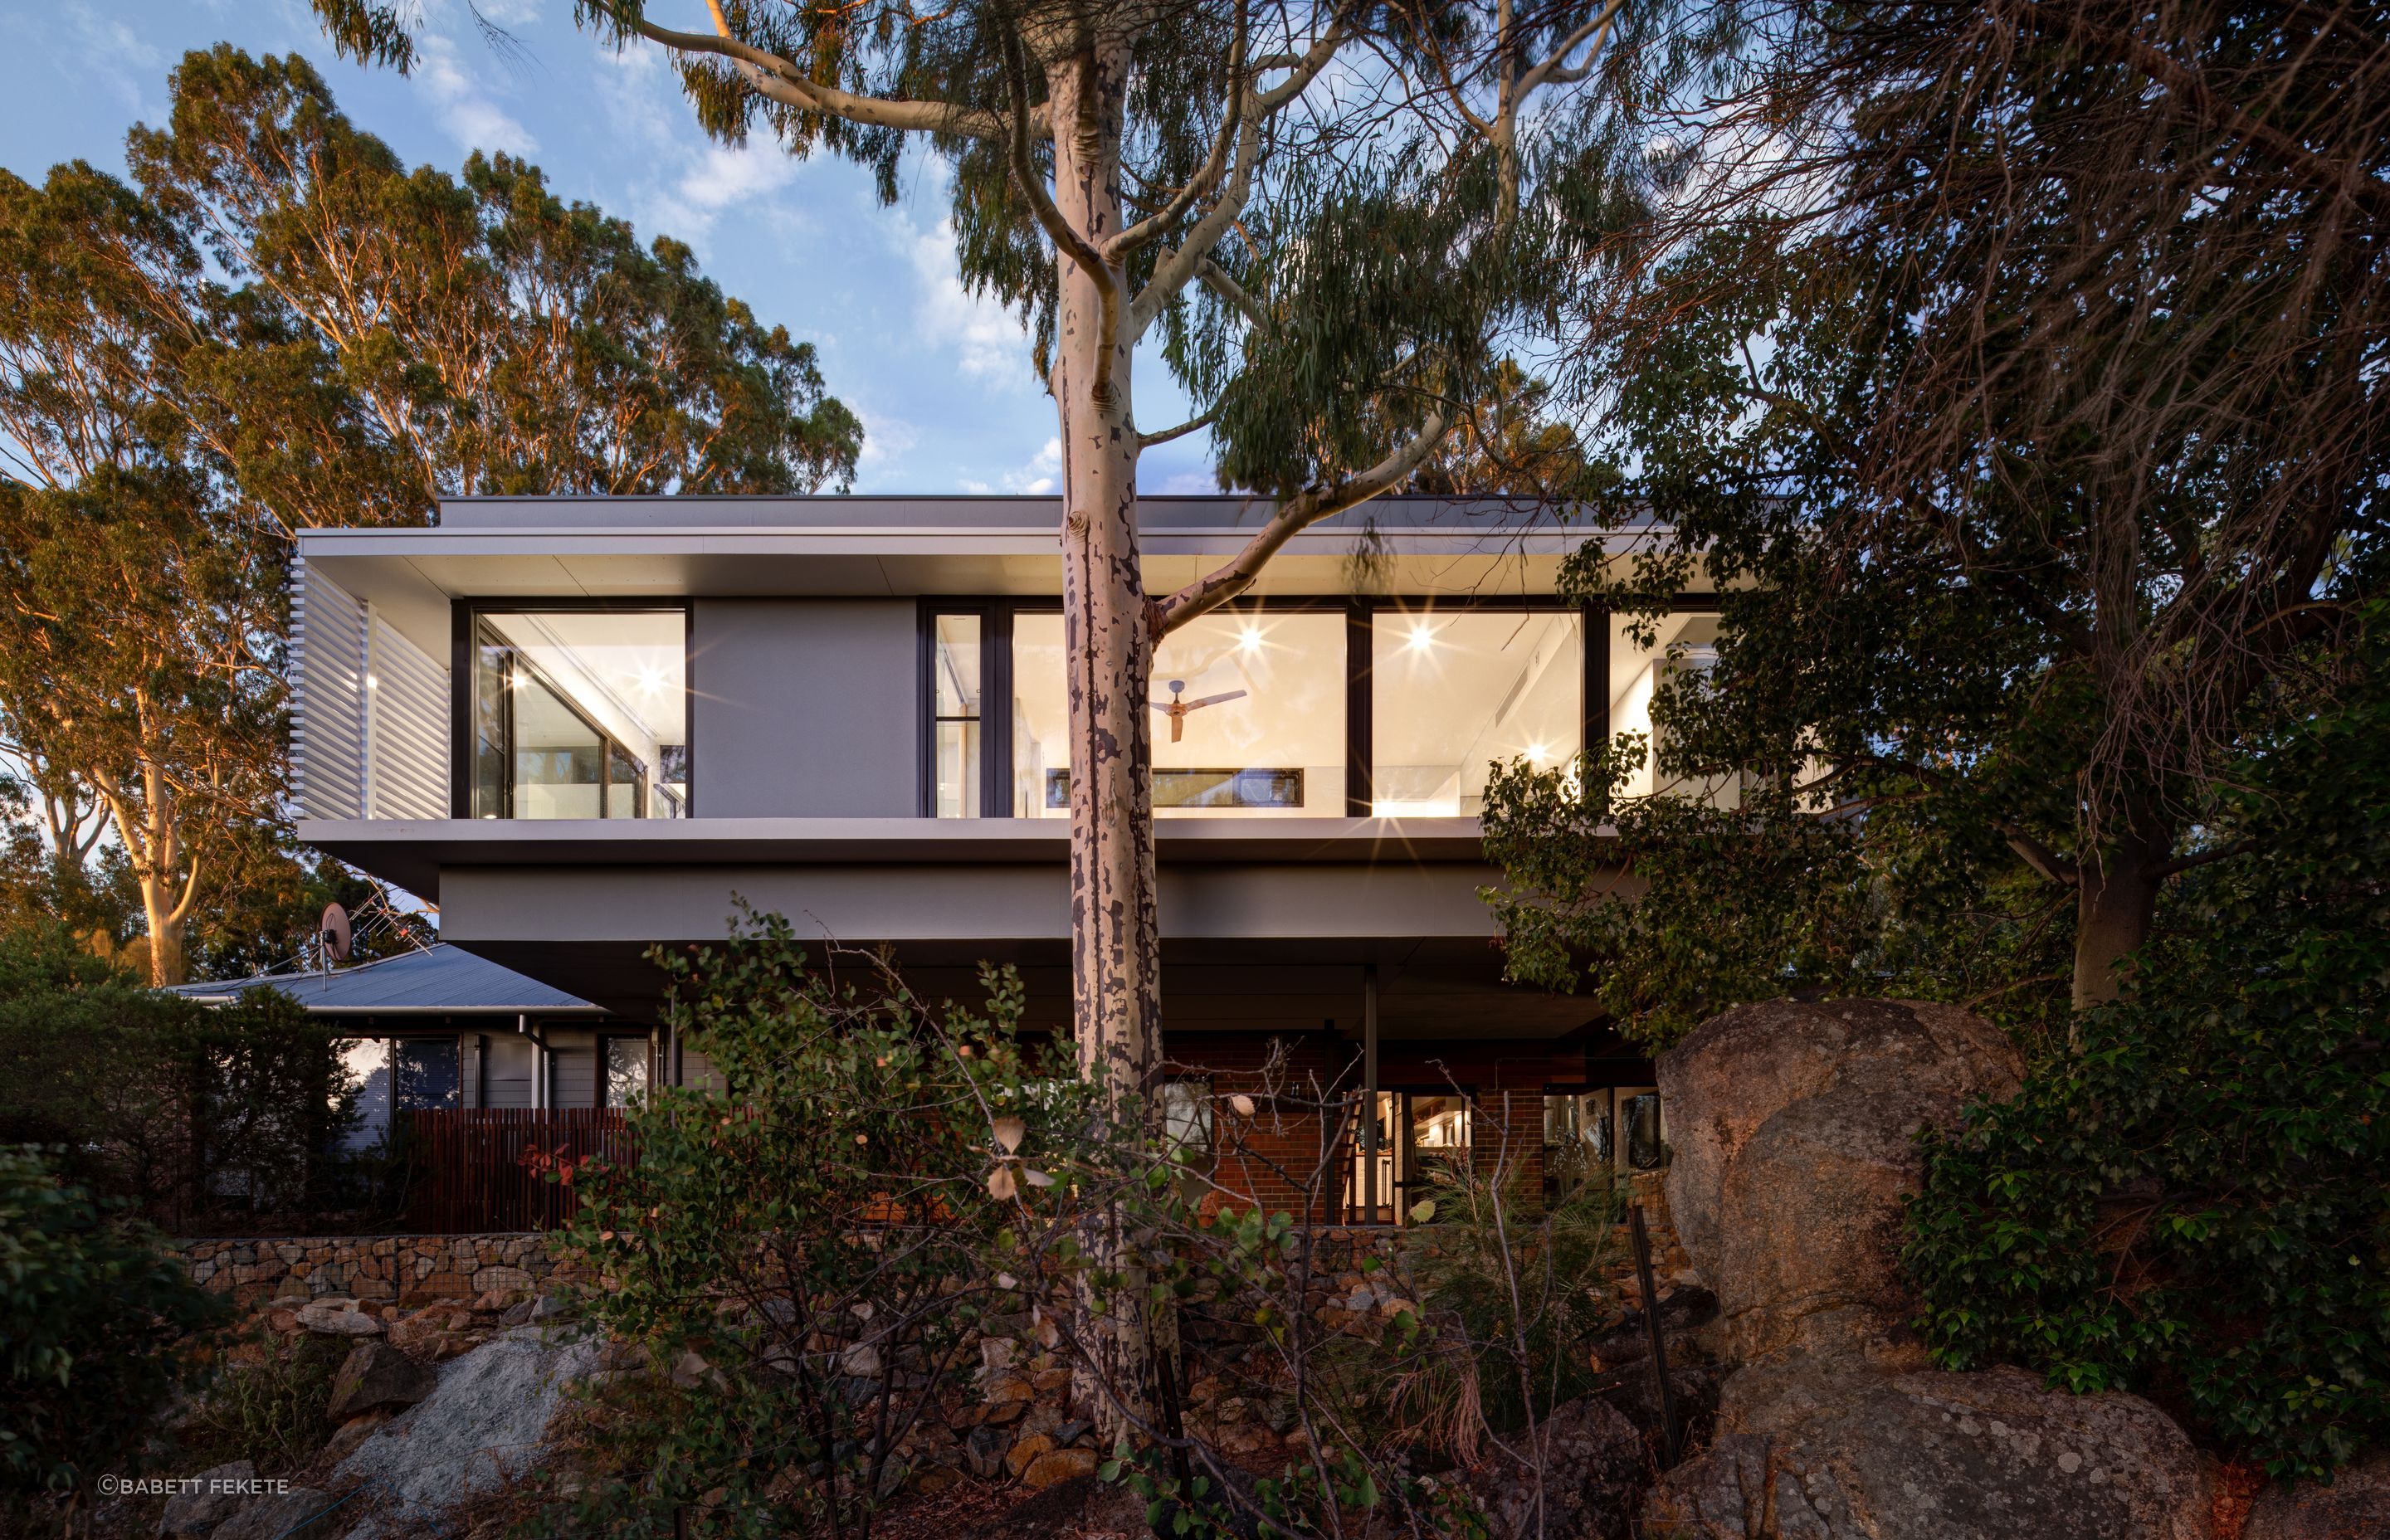 The final outcome is a one-of-a-kind structure that sits snugly in its bushland setting that well and truly exceeded the expectations of the architects and homeowners alike.